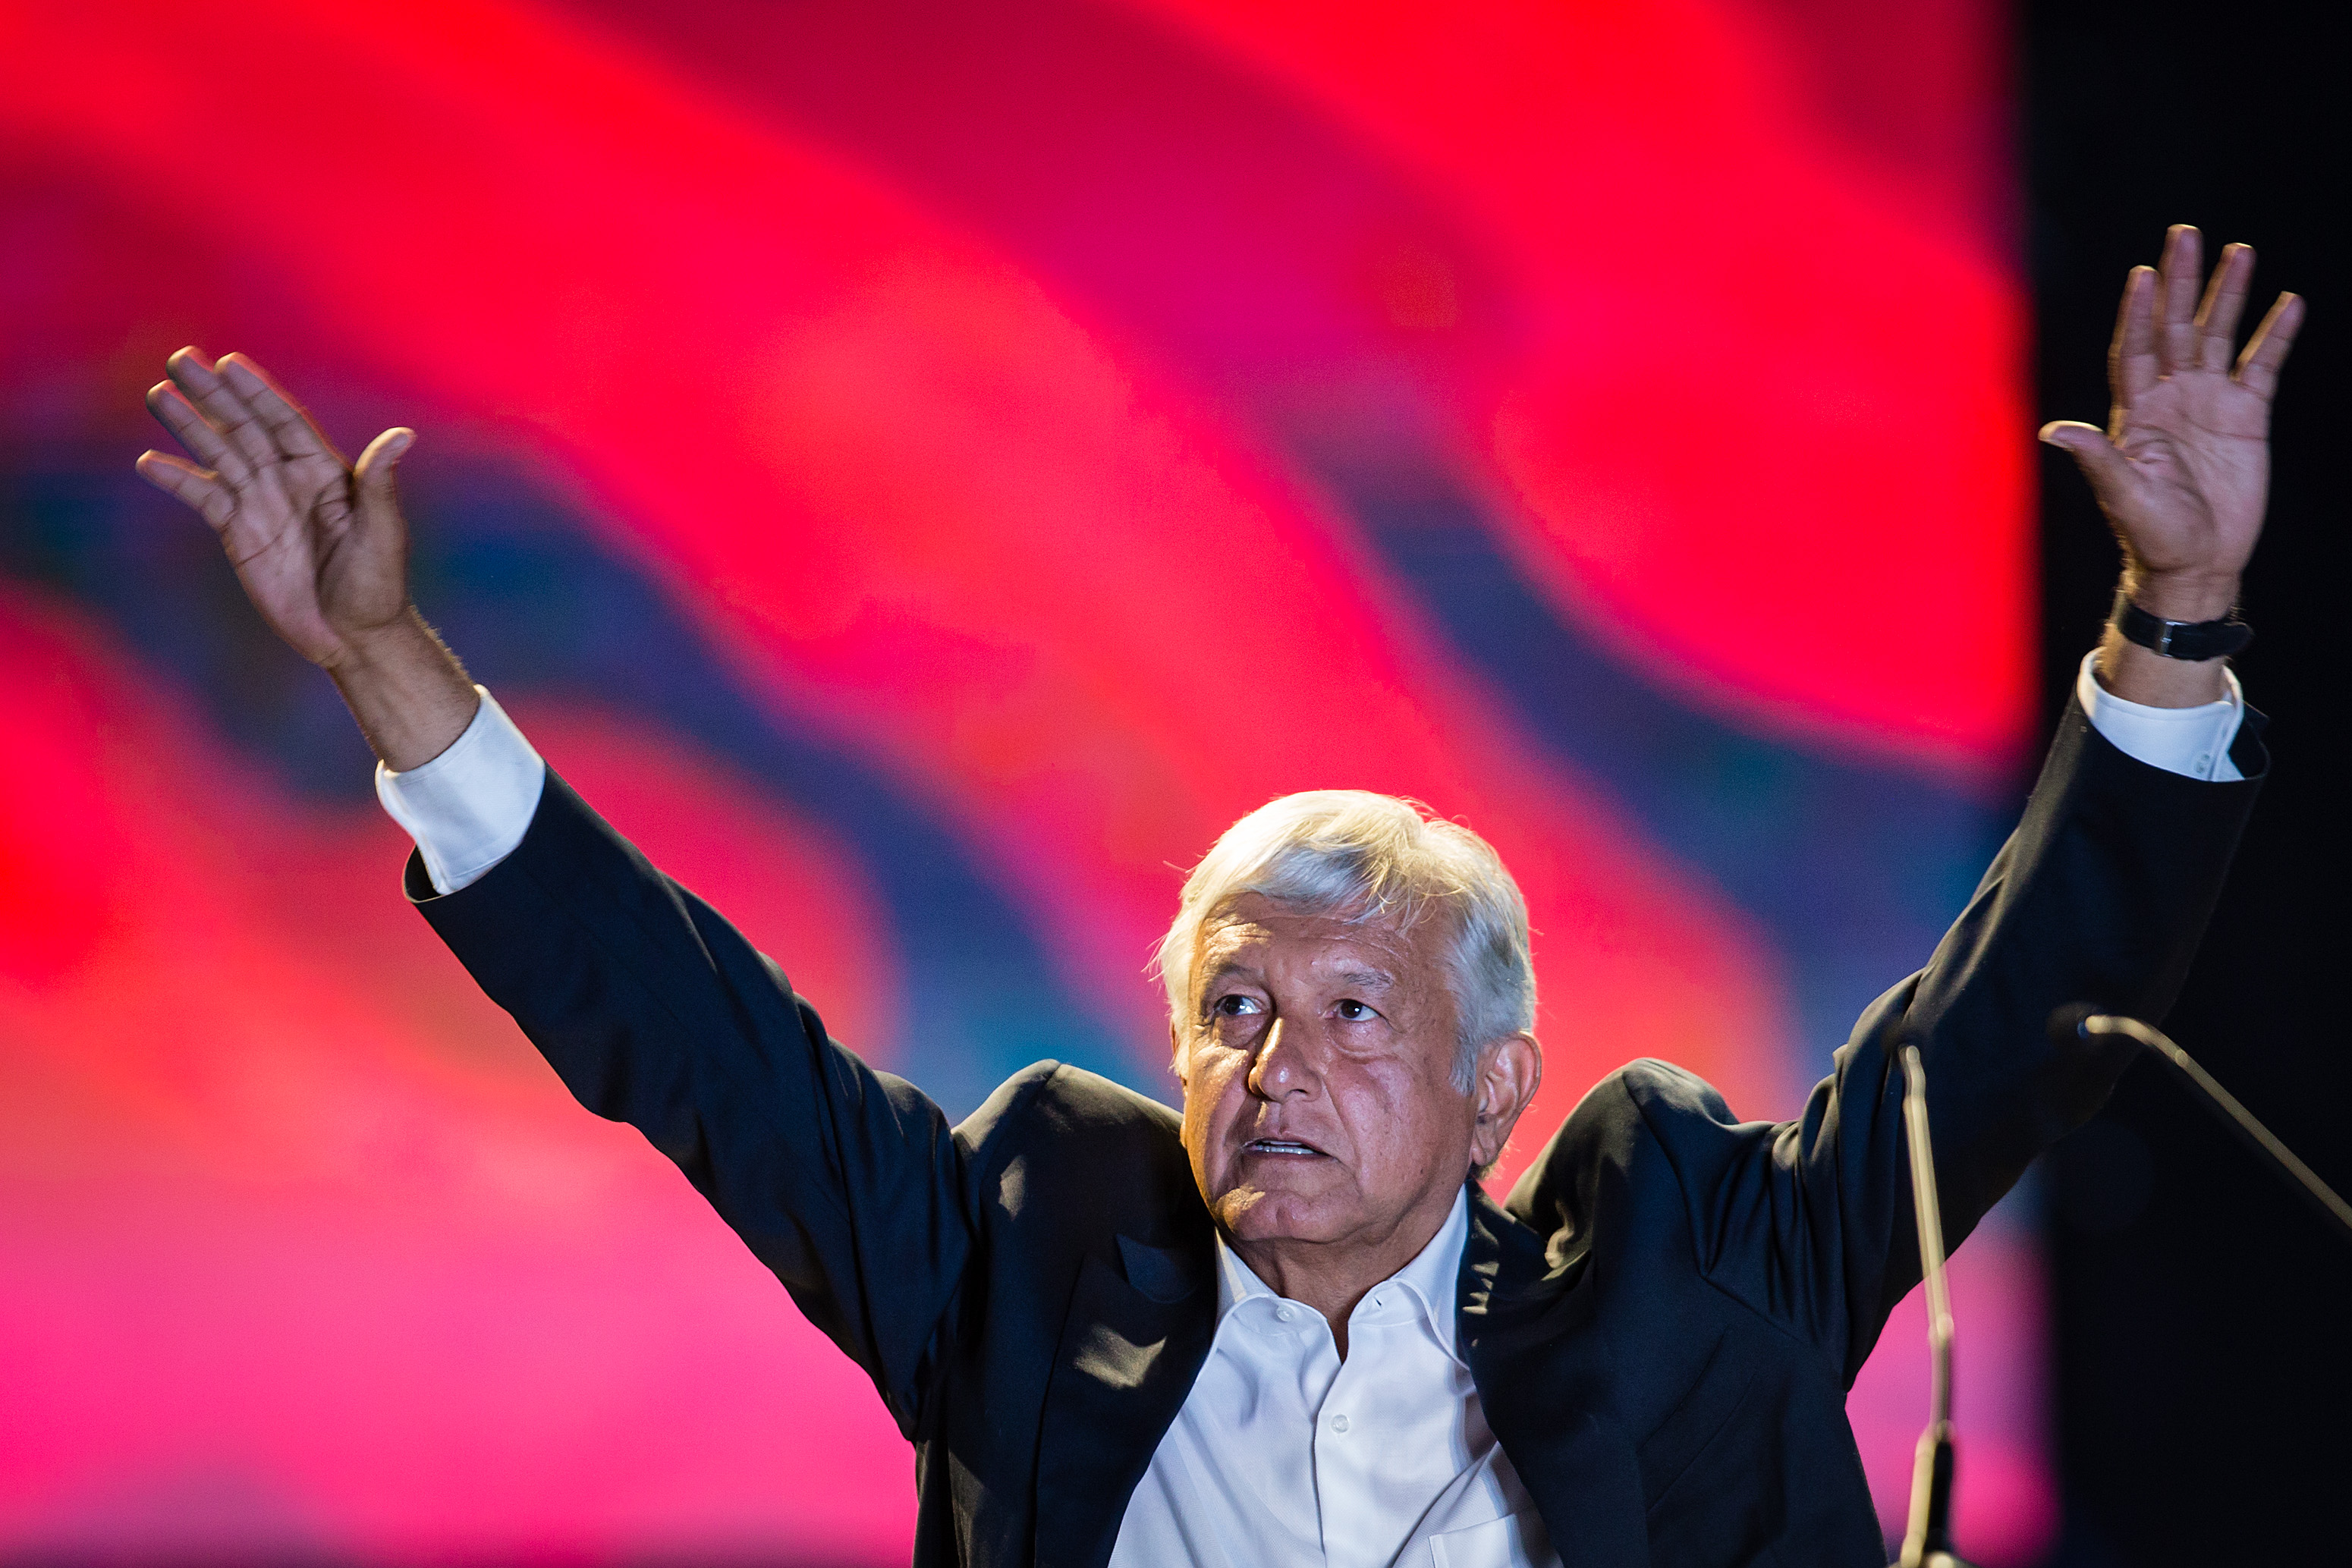 Presidential candidate Andres Manuel Lopez Obrador delivers a speech during the final event of the 2018 Presidential Campaign at Azteca Stadium on June 27, 2018 in Mexico City, Mexico. (Manuel Velasquez&mdash;Getty Images)